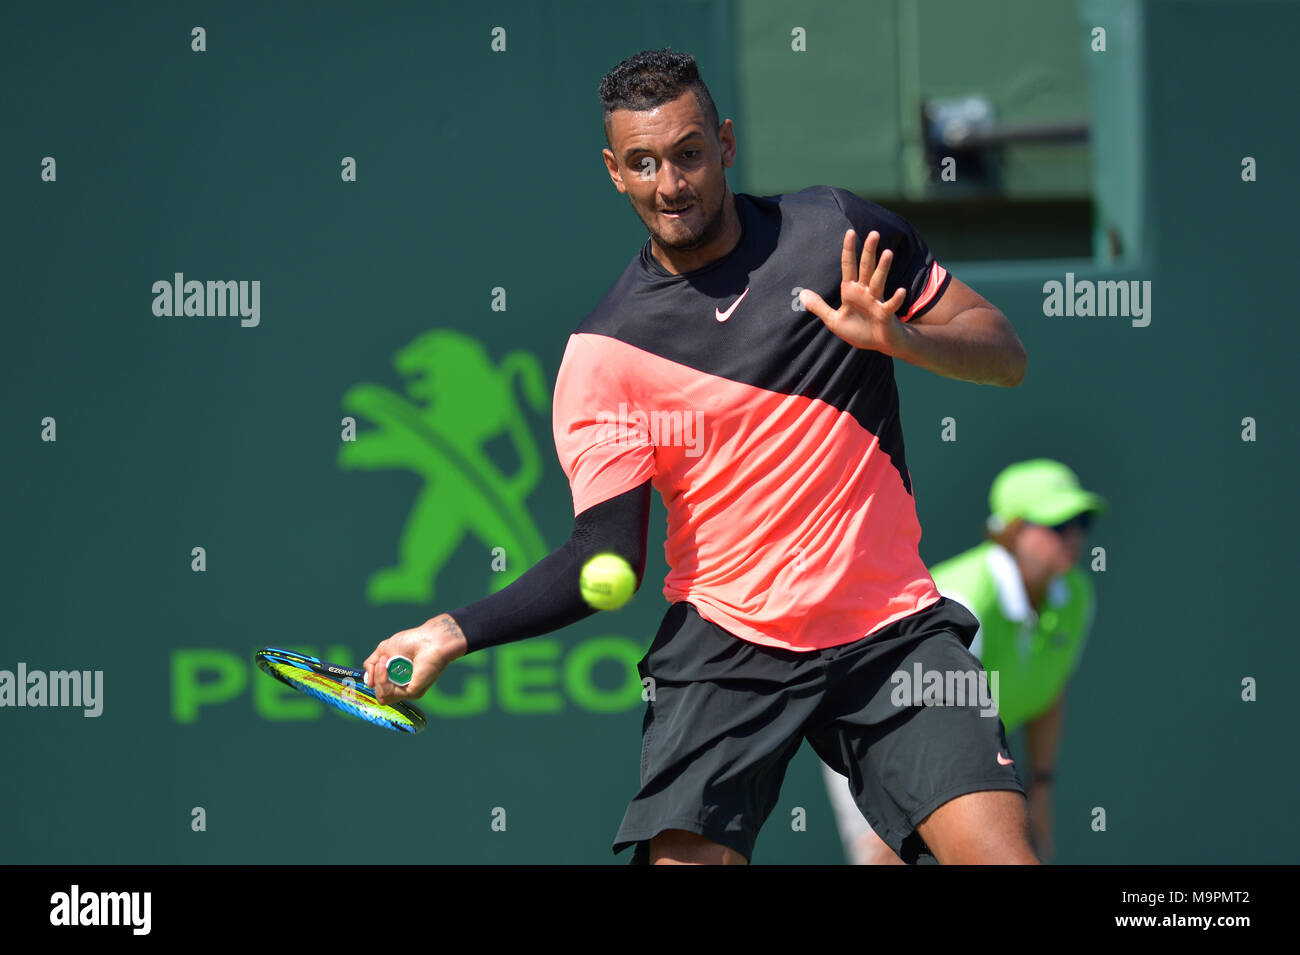 KEY BISCAYNE, FL - MARCH 27: Nick Kyrgios during Day 9 at the Miami Open Presented by Itau at Crandon Park Tennis Center on March 27, 2018 in Key Biscayne, Florida. People: Nick Kyrgios Stock Photo